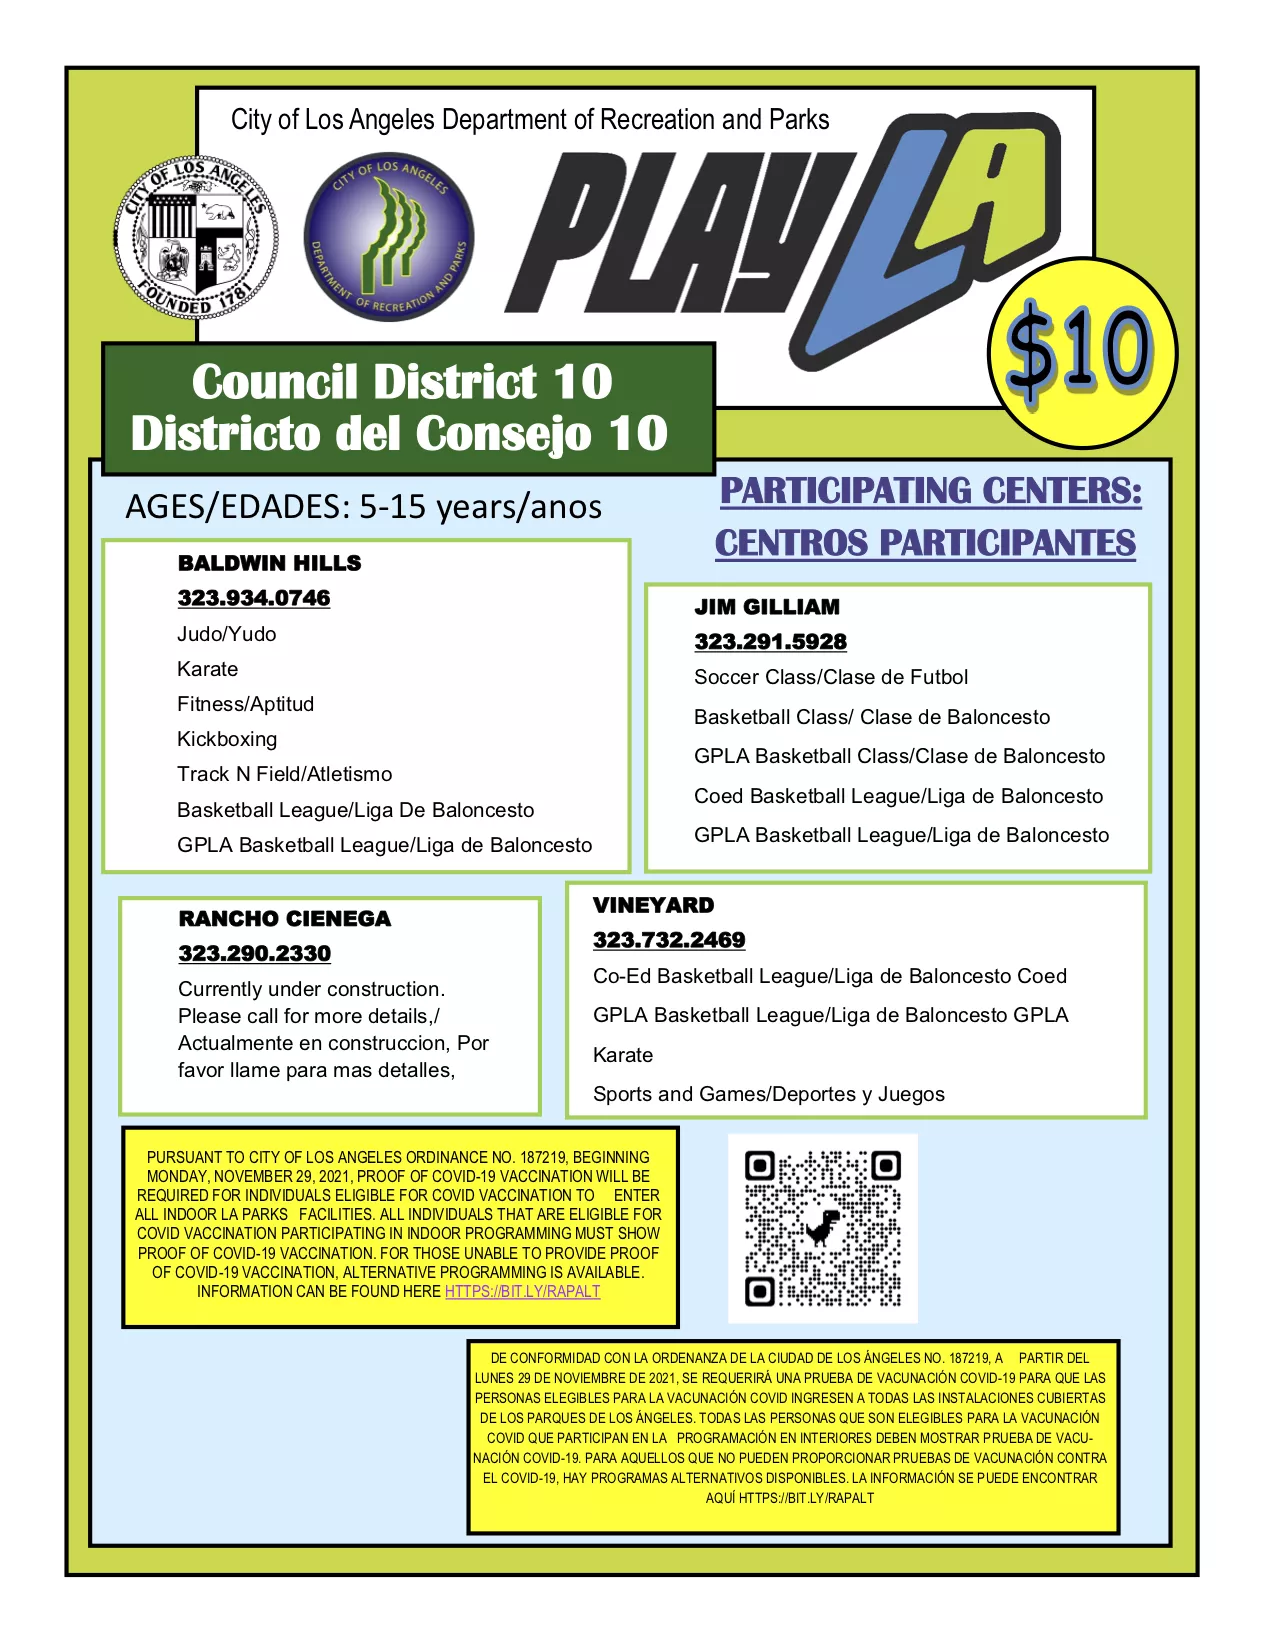 Winter PlayLA flier with program information for CD10 parks